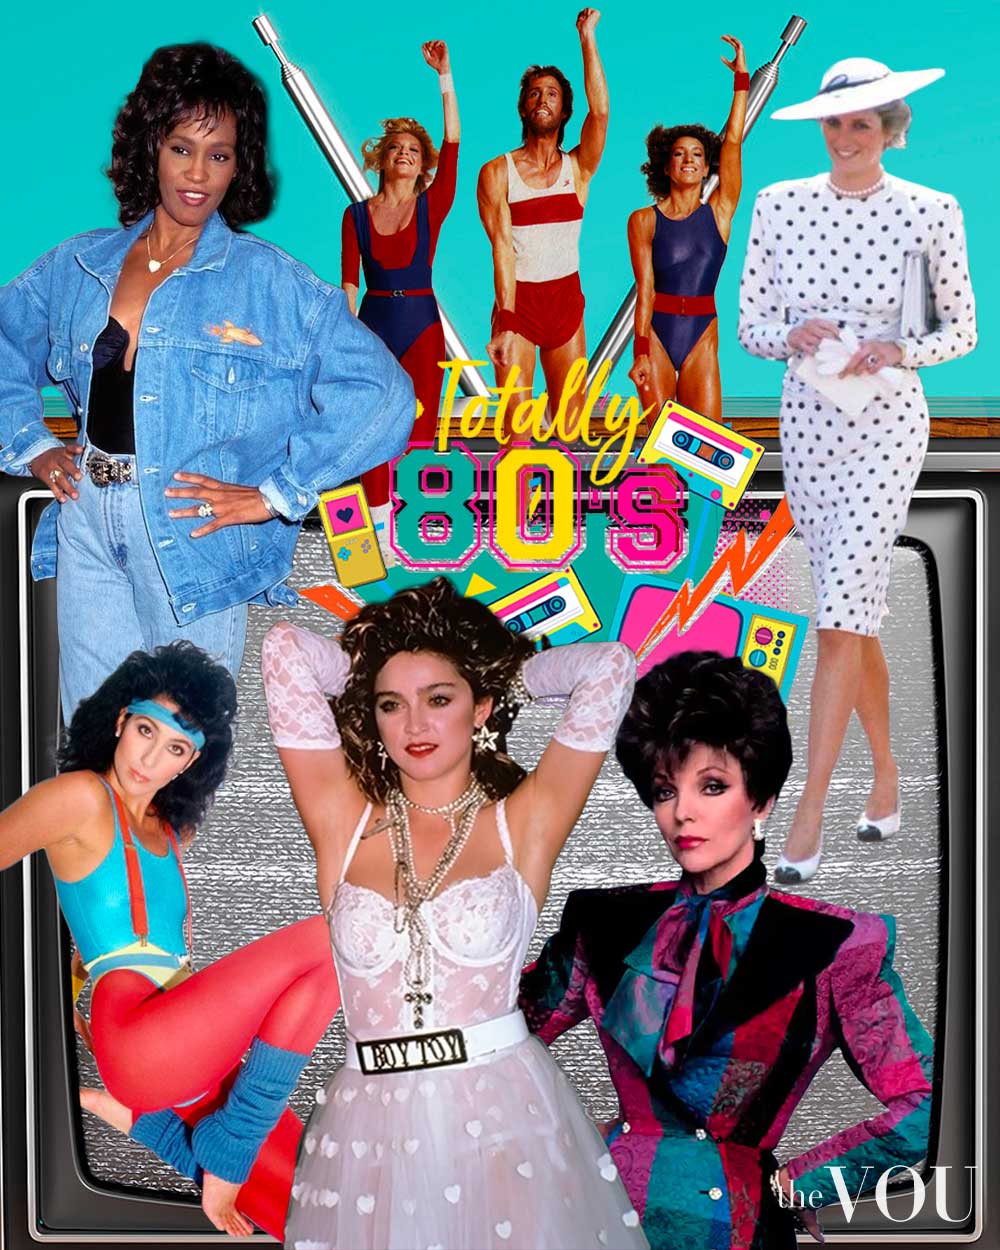 80s throwback outfits